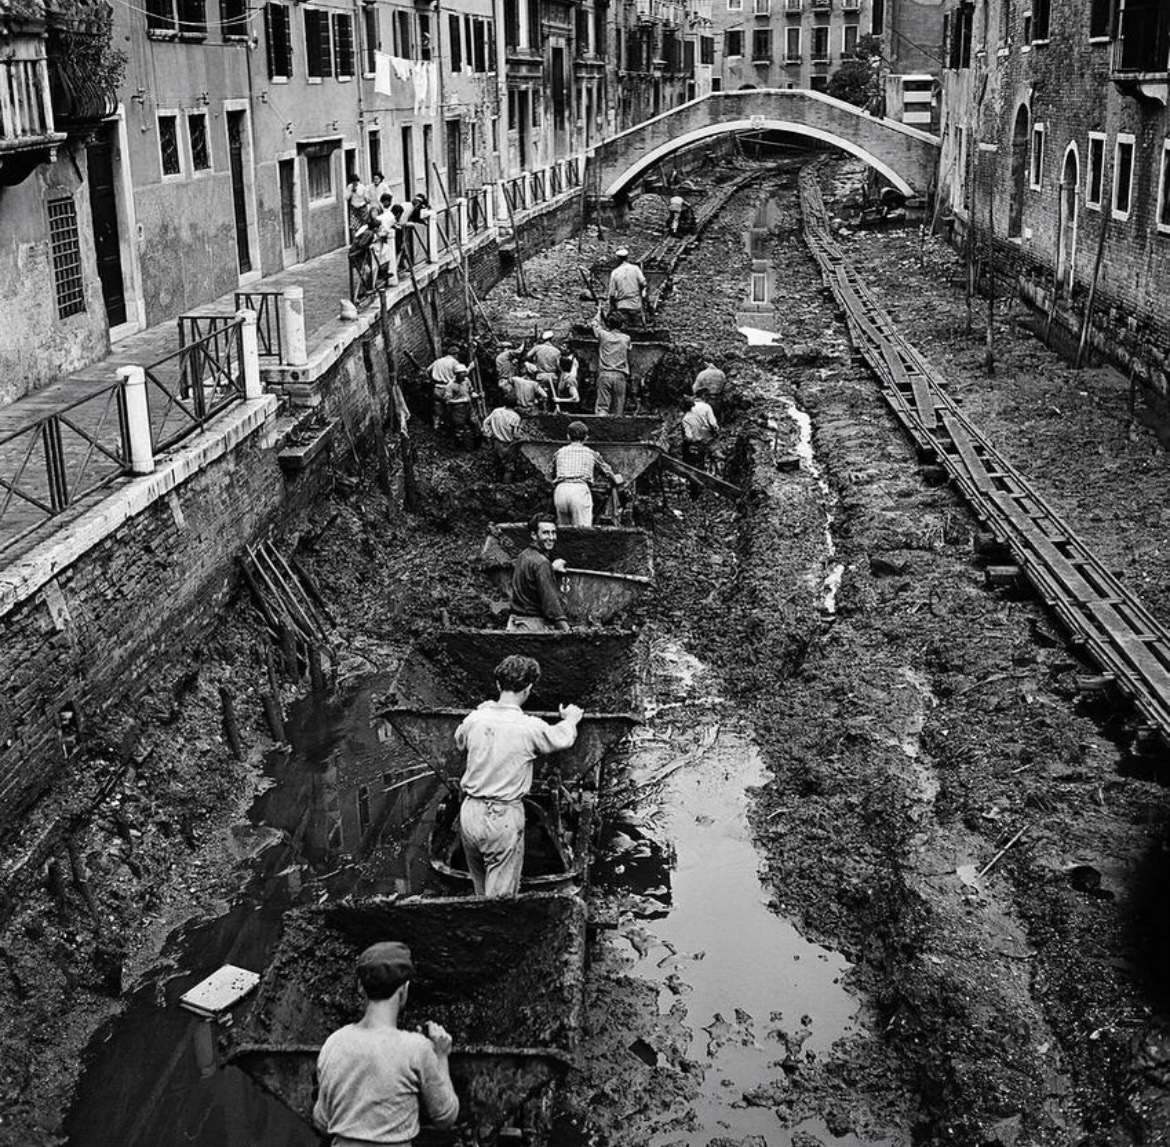 The grand canal is drained in order to allow it to be cleared of silt and mud. Venice, 1956.